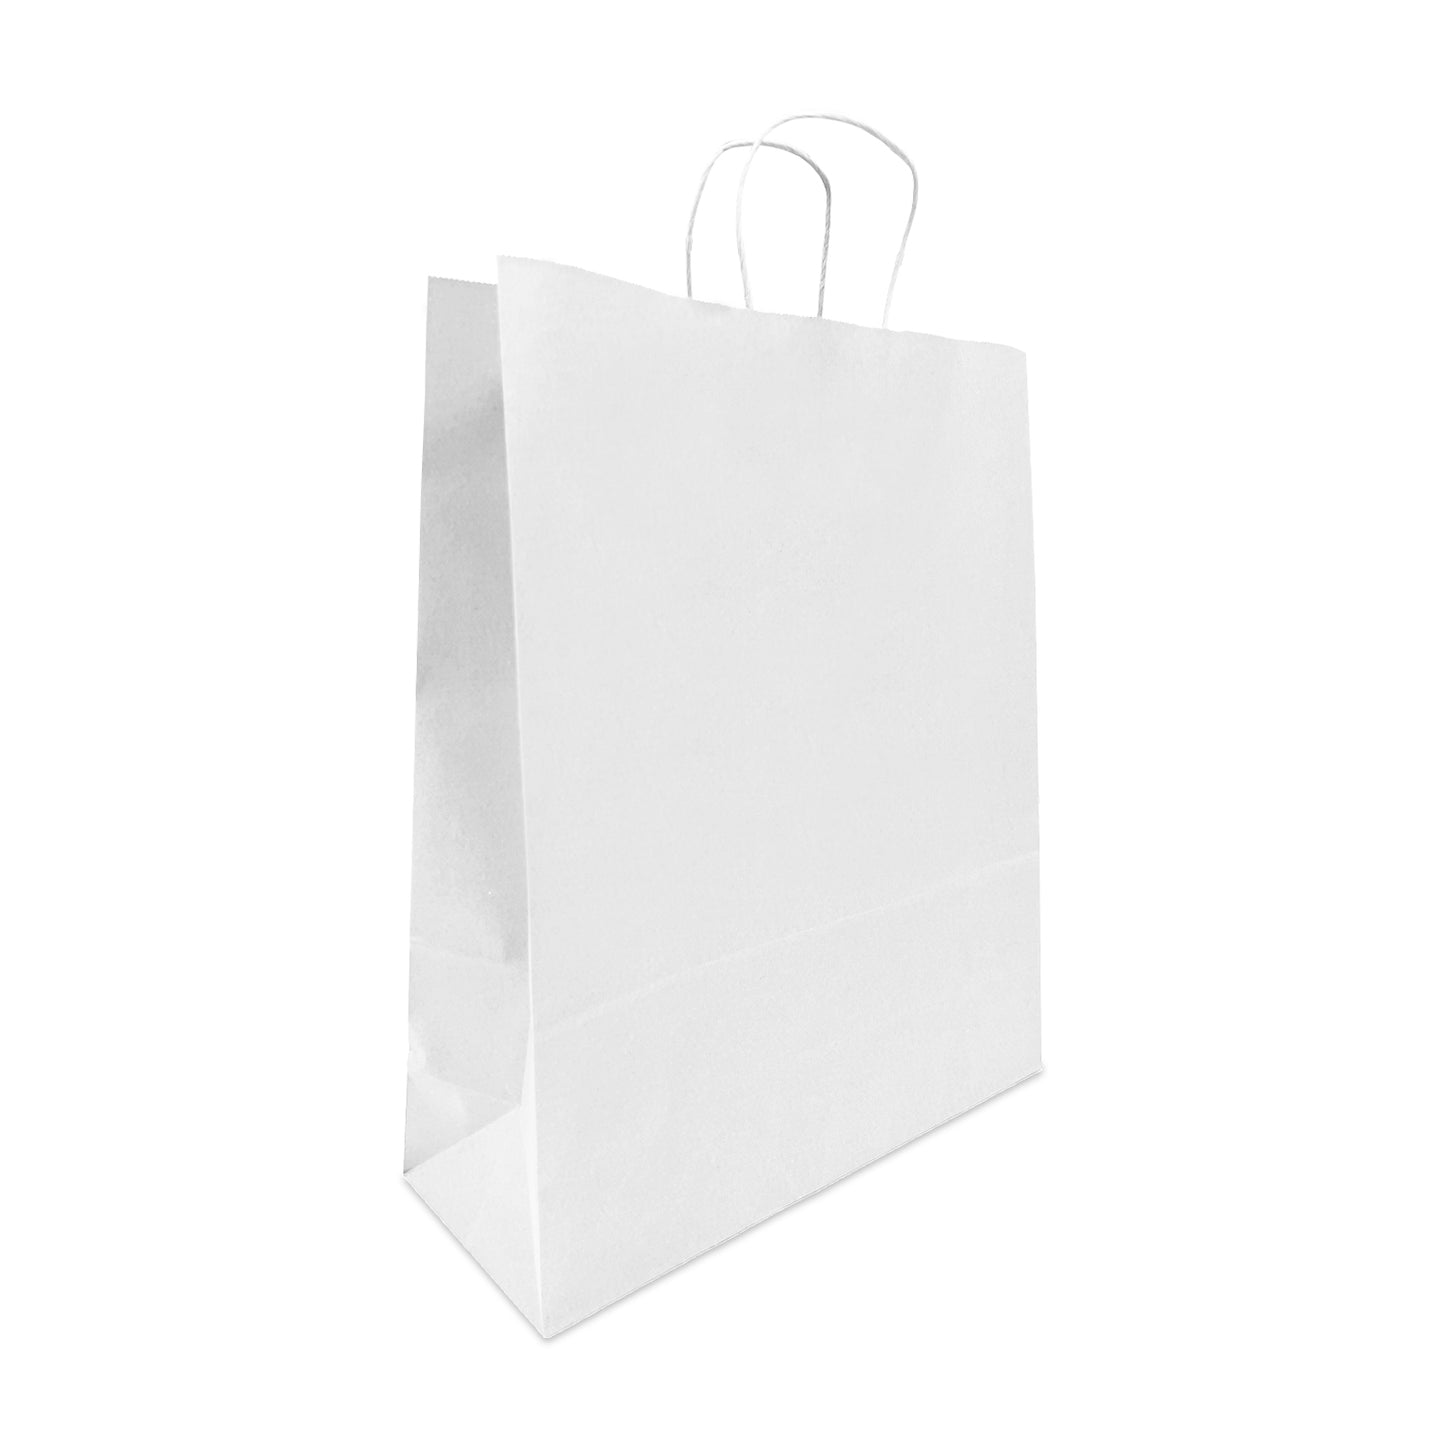 200 Pcs, Queen, 16x6x19.25 inches, White Kraft Paper Bags, with Twisted Handles